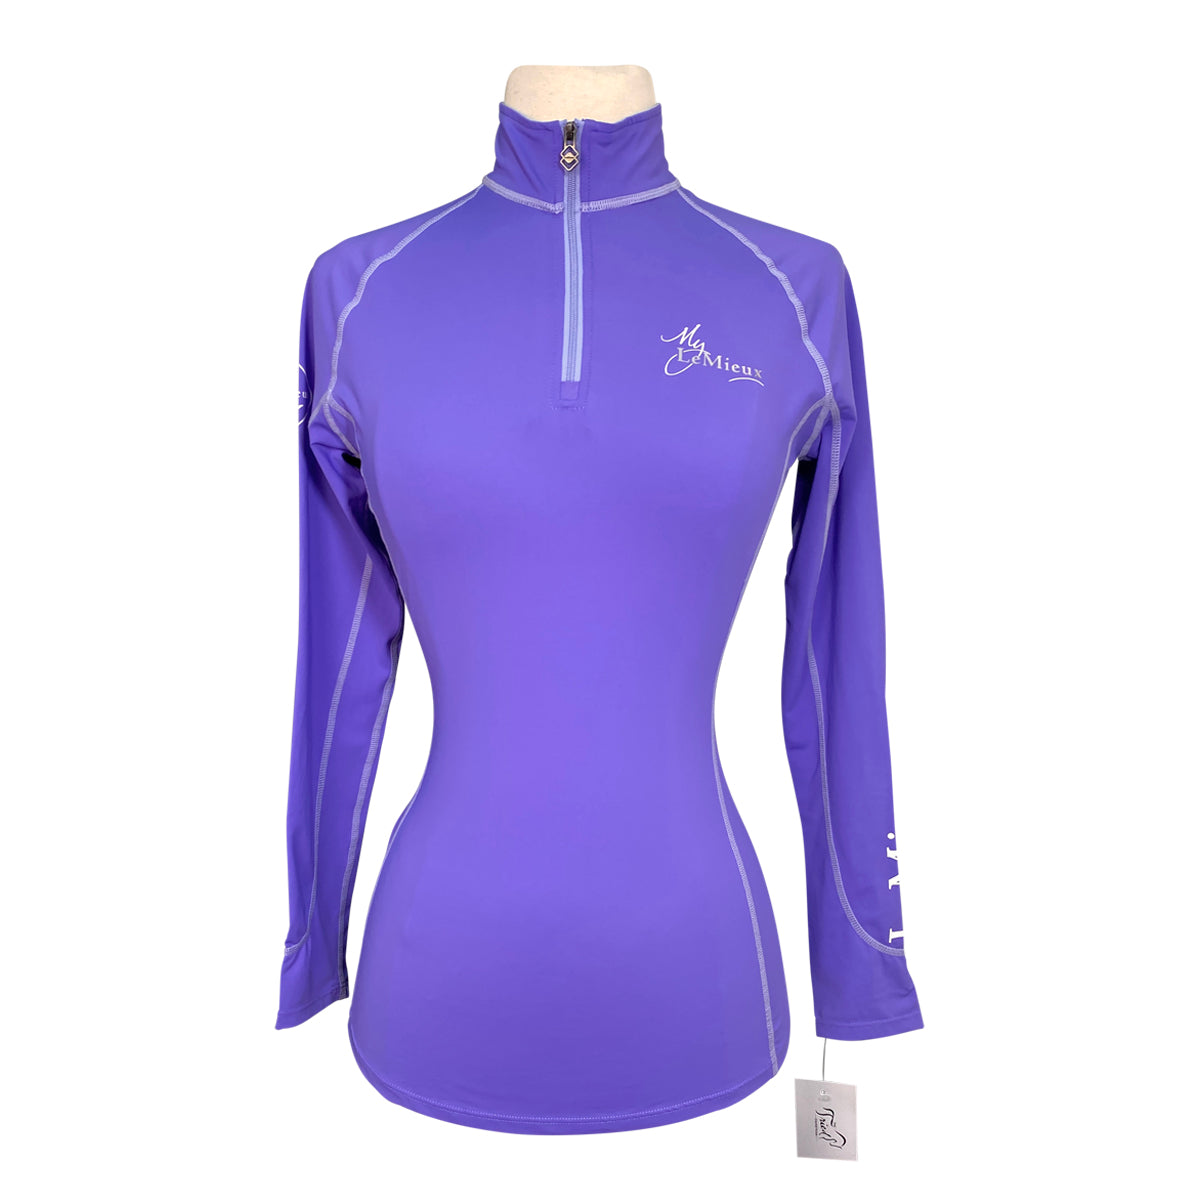 LeMieux Base Layer in Bluebell 